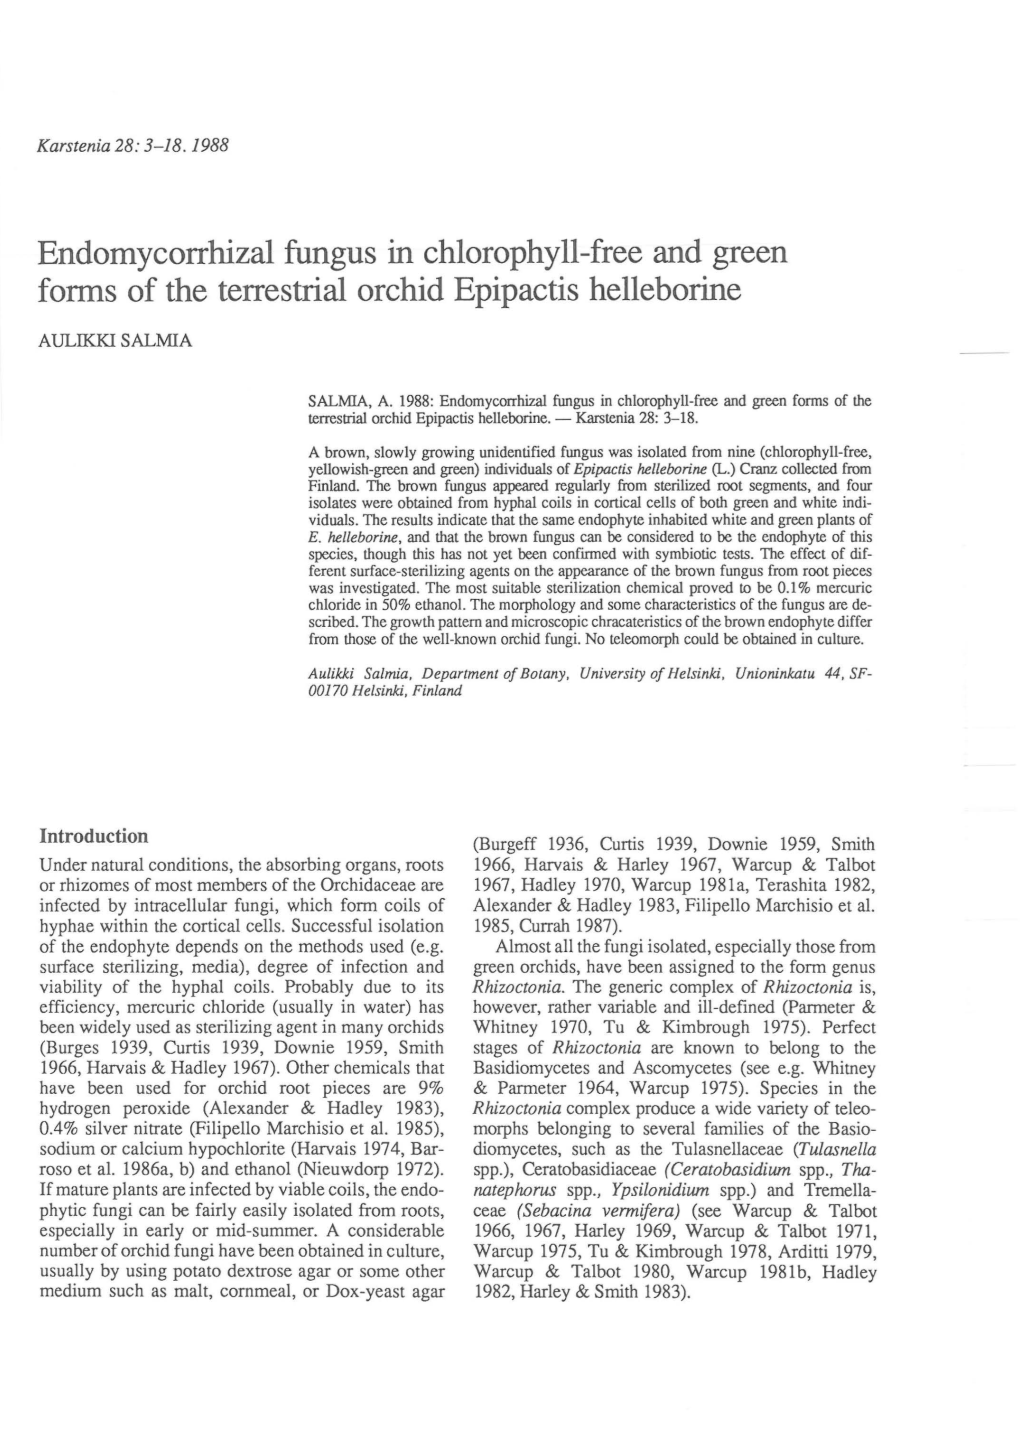 Endomycorrhizal Fungus in Chlorophyll-Free and Green Forms of the Terrestrial Orchid Epipactis Helleborine